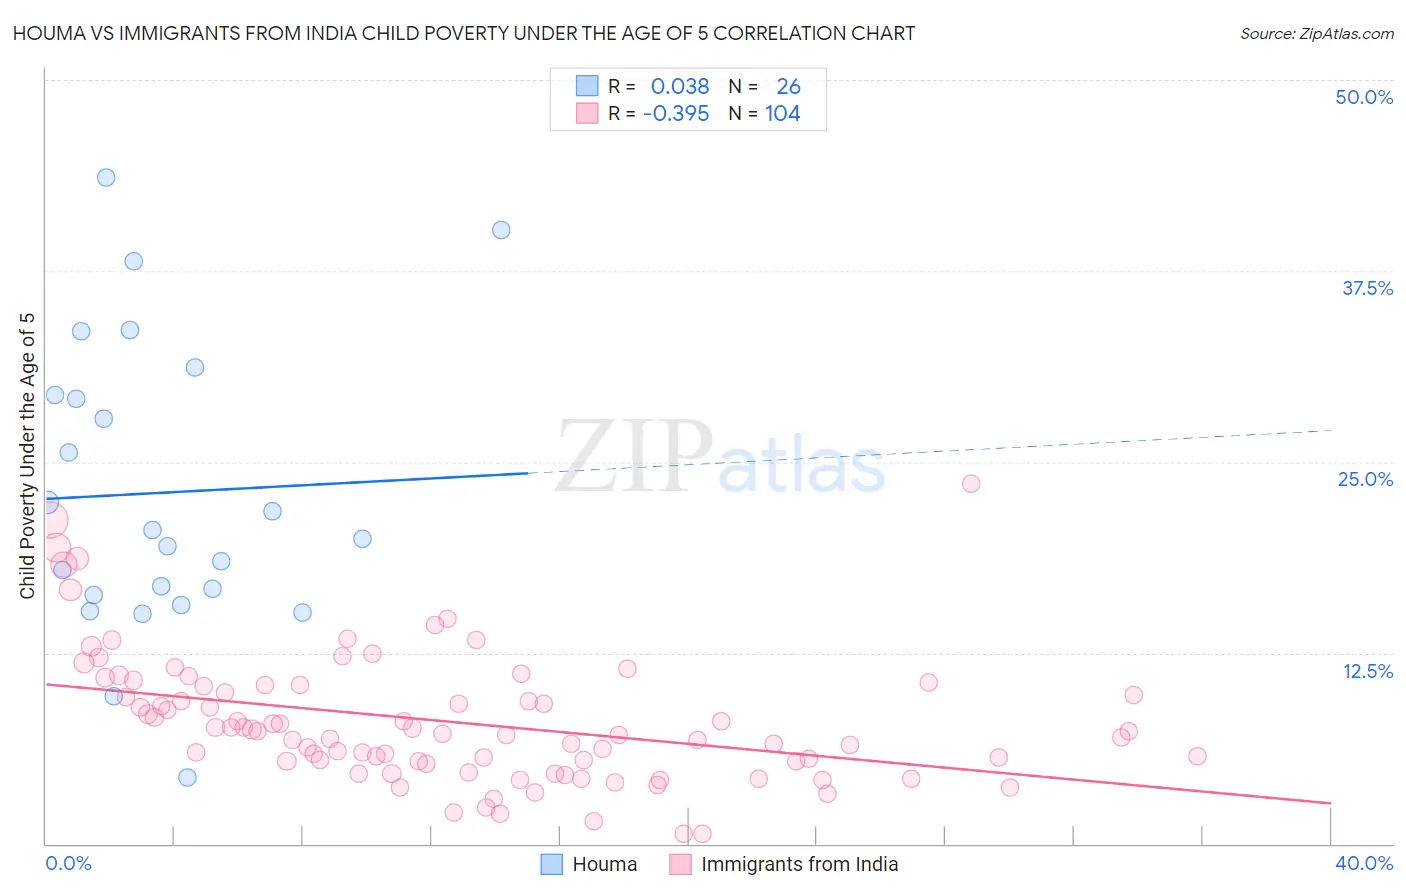 Houma vs Immigrants from India Child Poverty Under the Age of 5